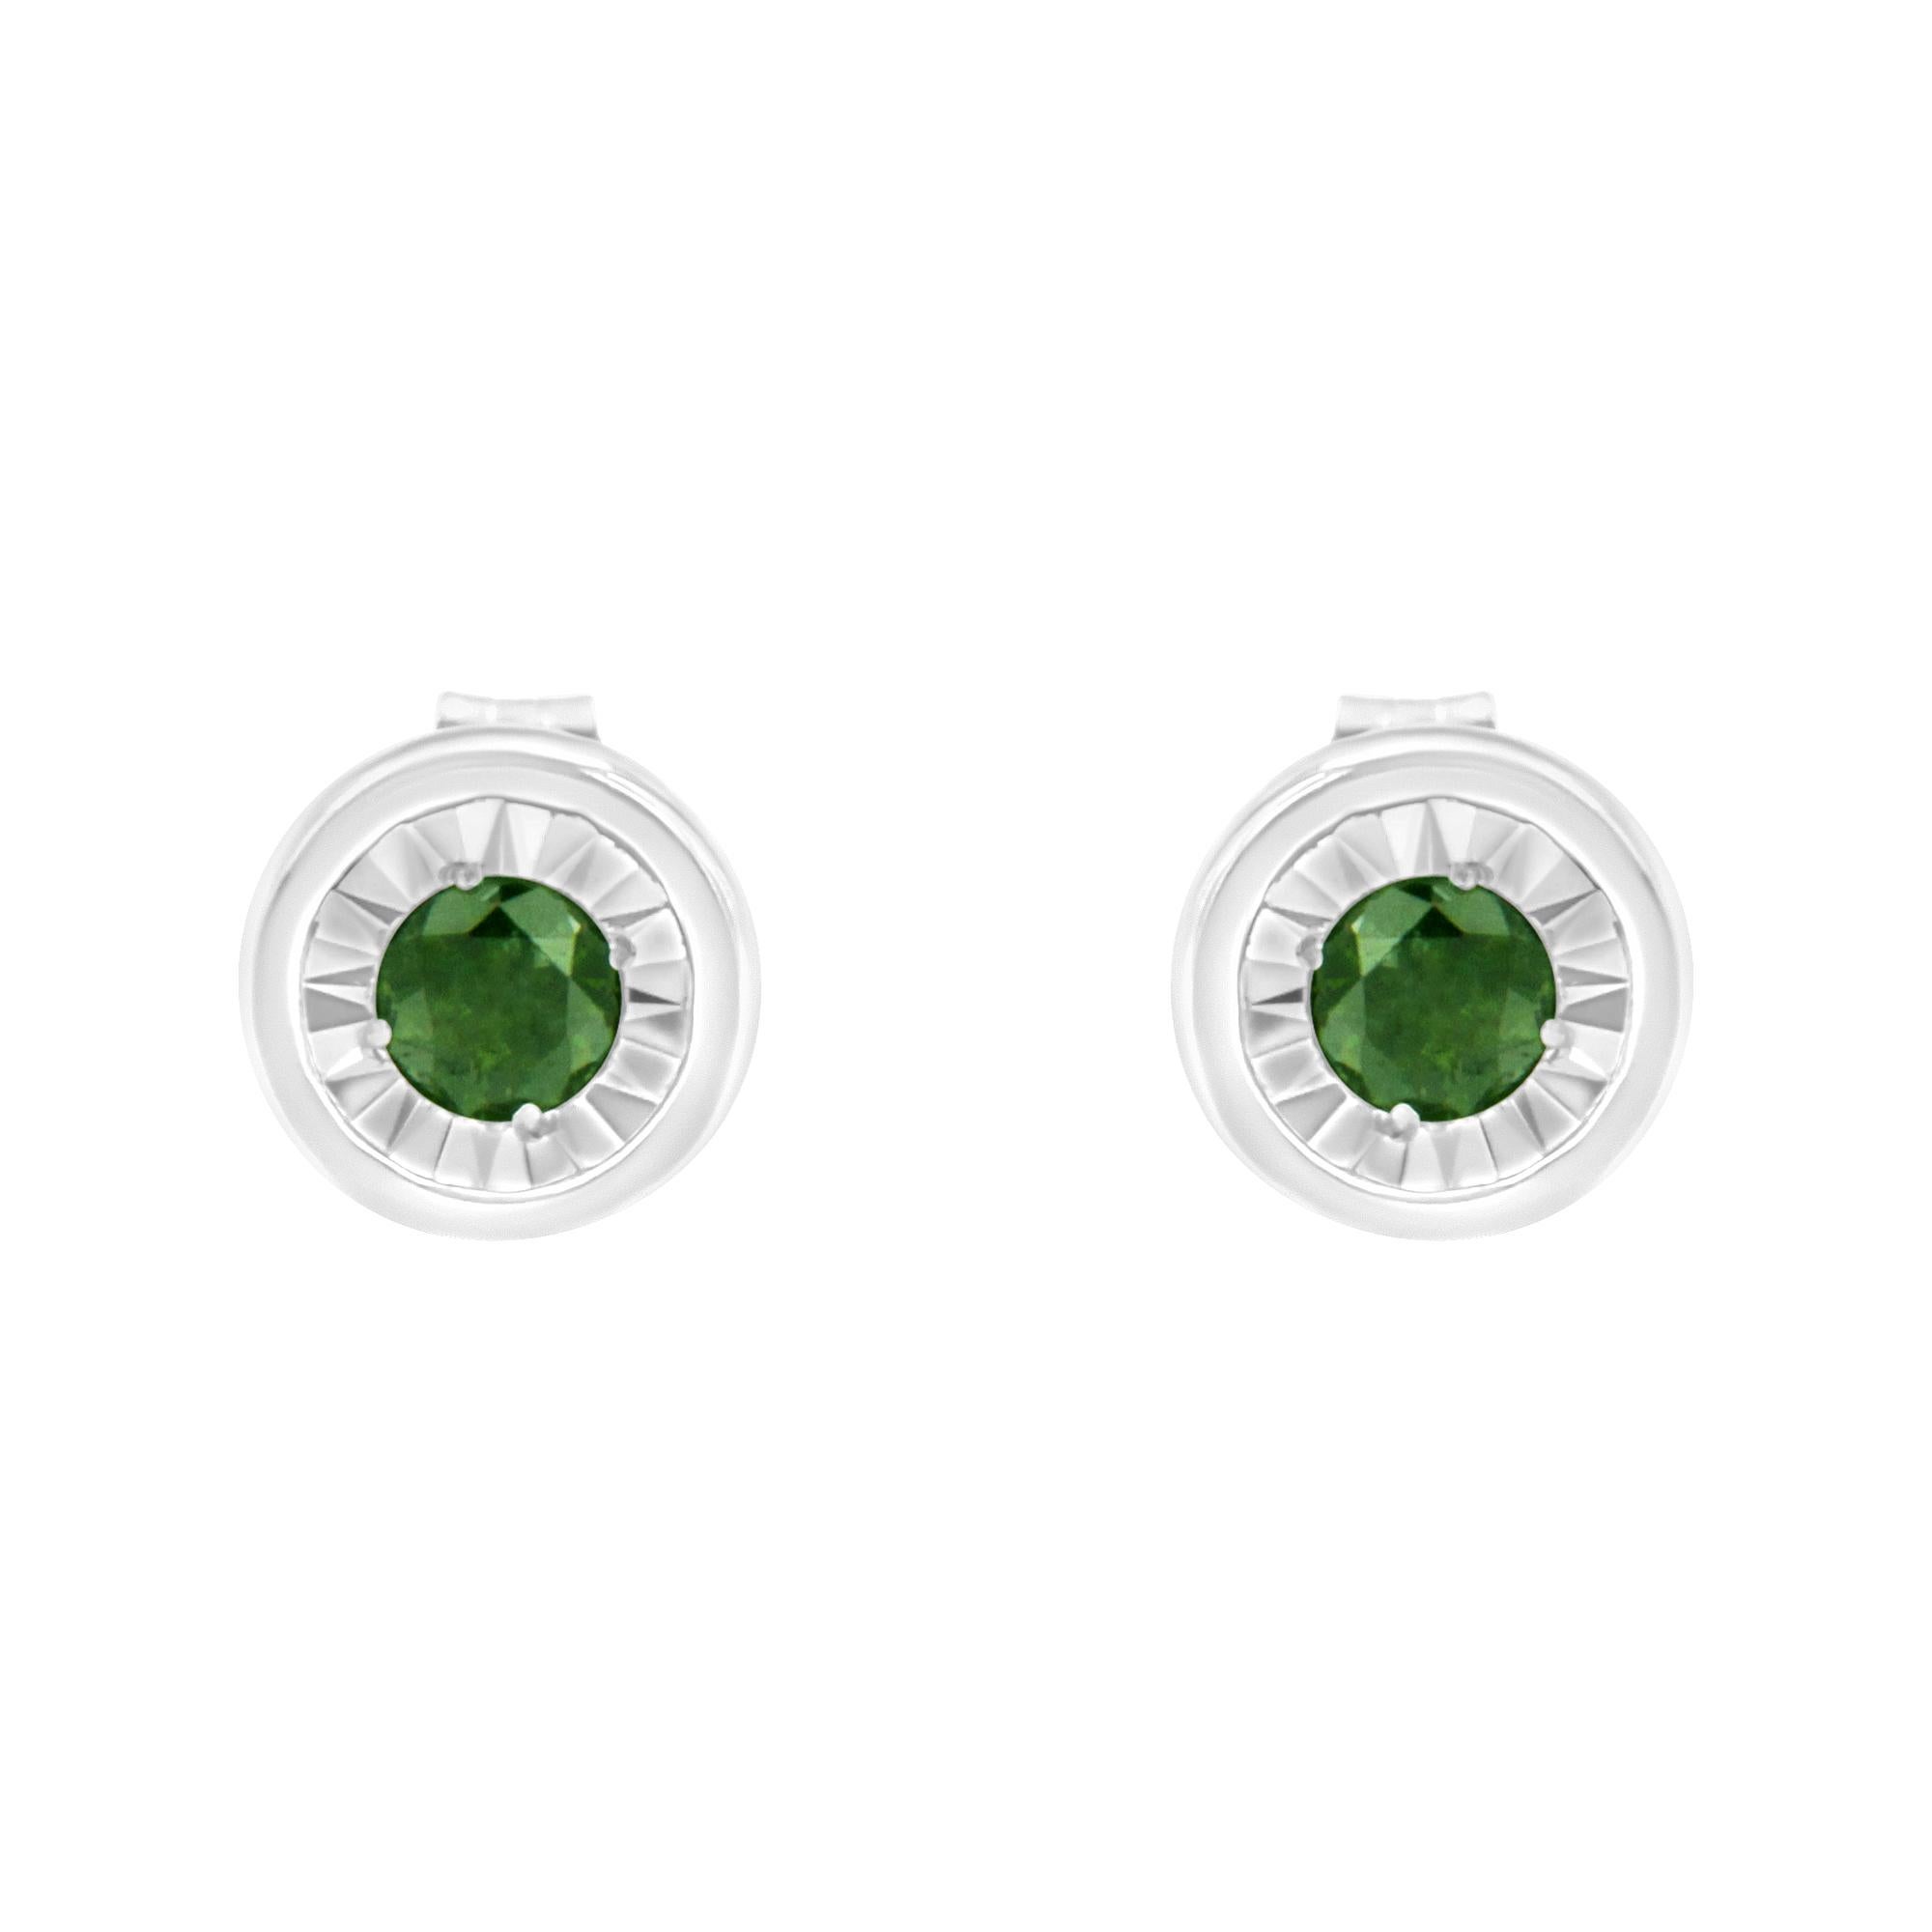 This sleek pair of diamond studs features color treated green diamonds in a bezel setting. The modern design is crafted in a cool sterling silver making them the perfect choice to add a touch of color to everyday wear. The total diamond weight is